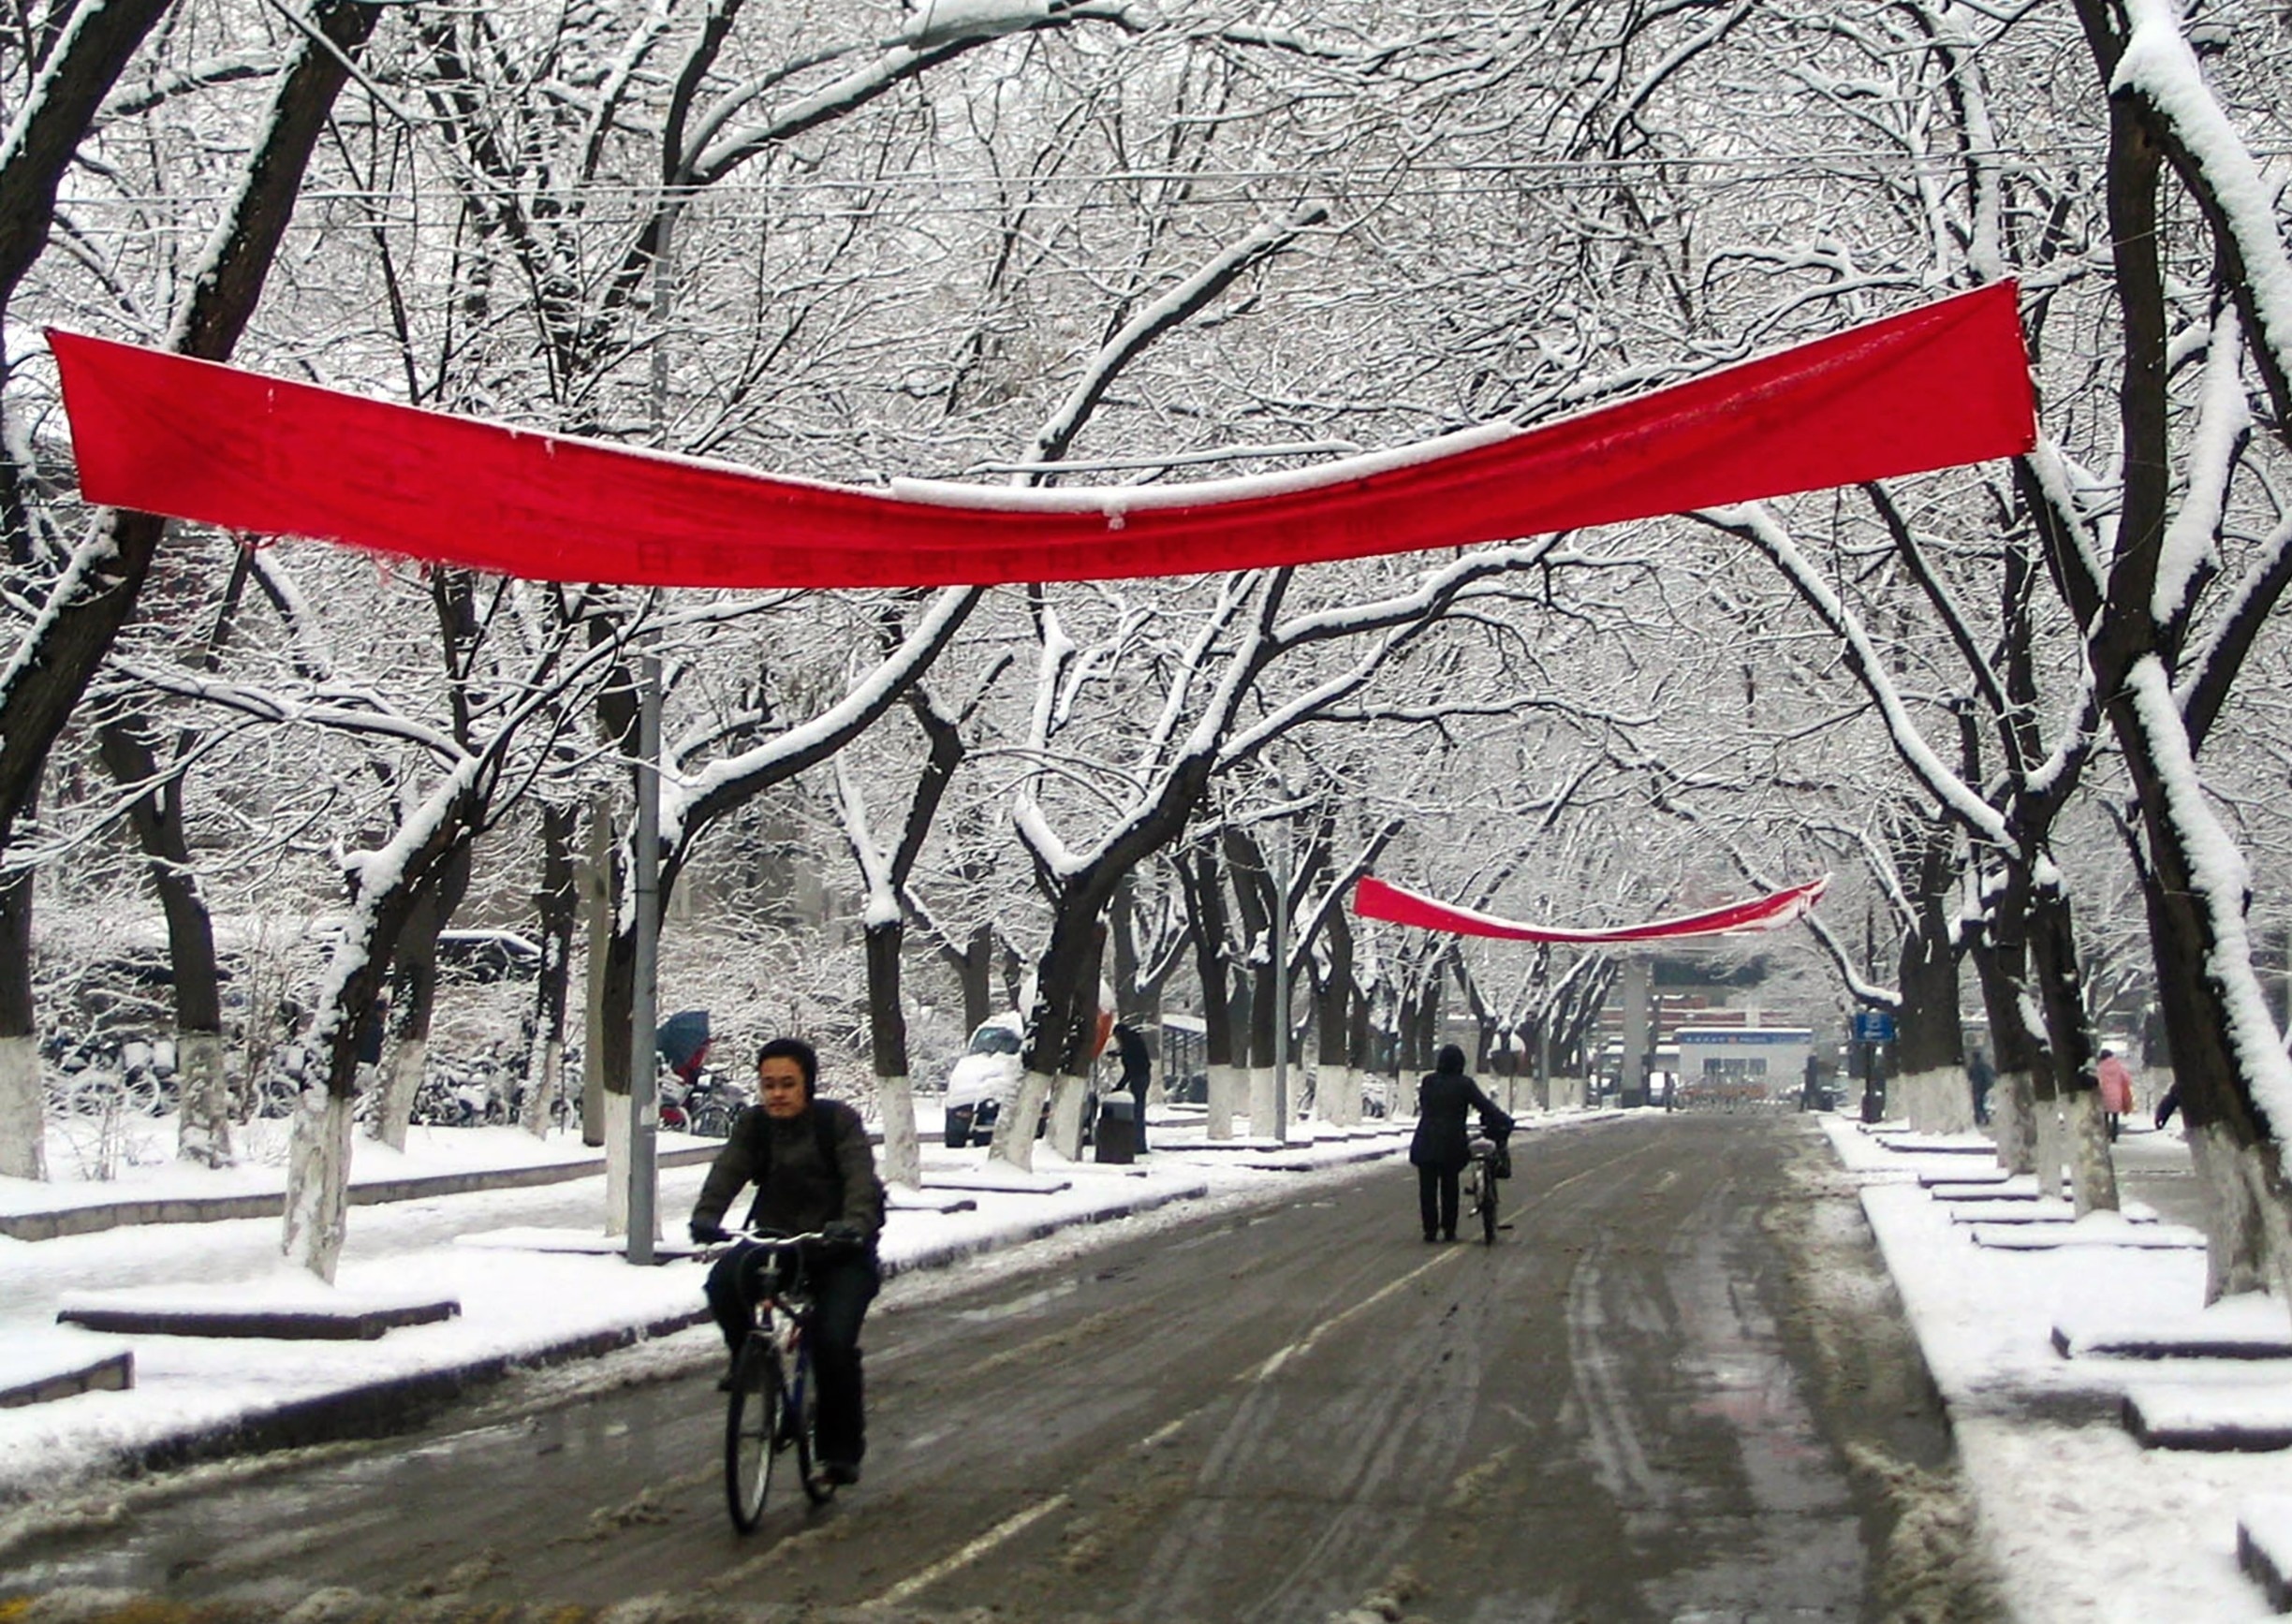 Peking University (as it's still referred to in English) has beautiful grounds, even in winter. #snow